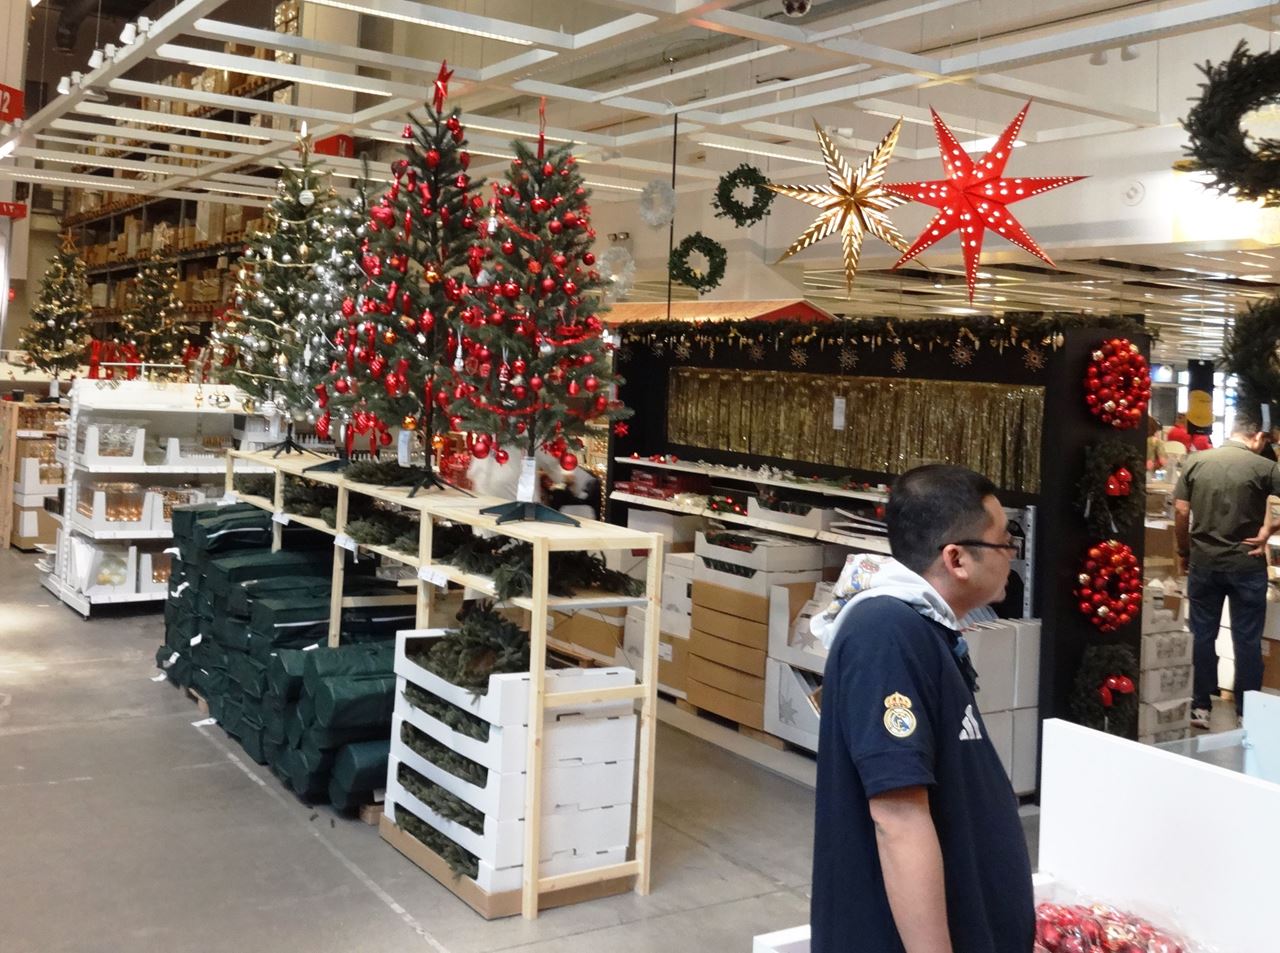 Christmas started at IKEA